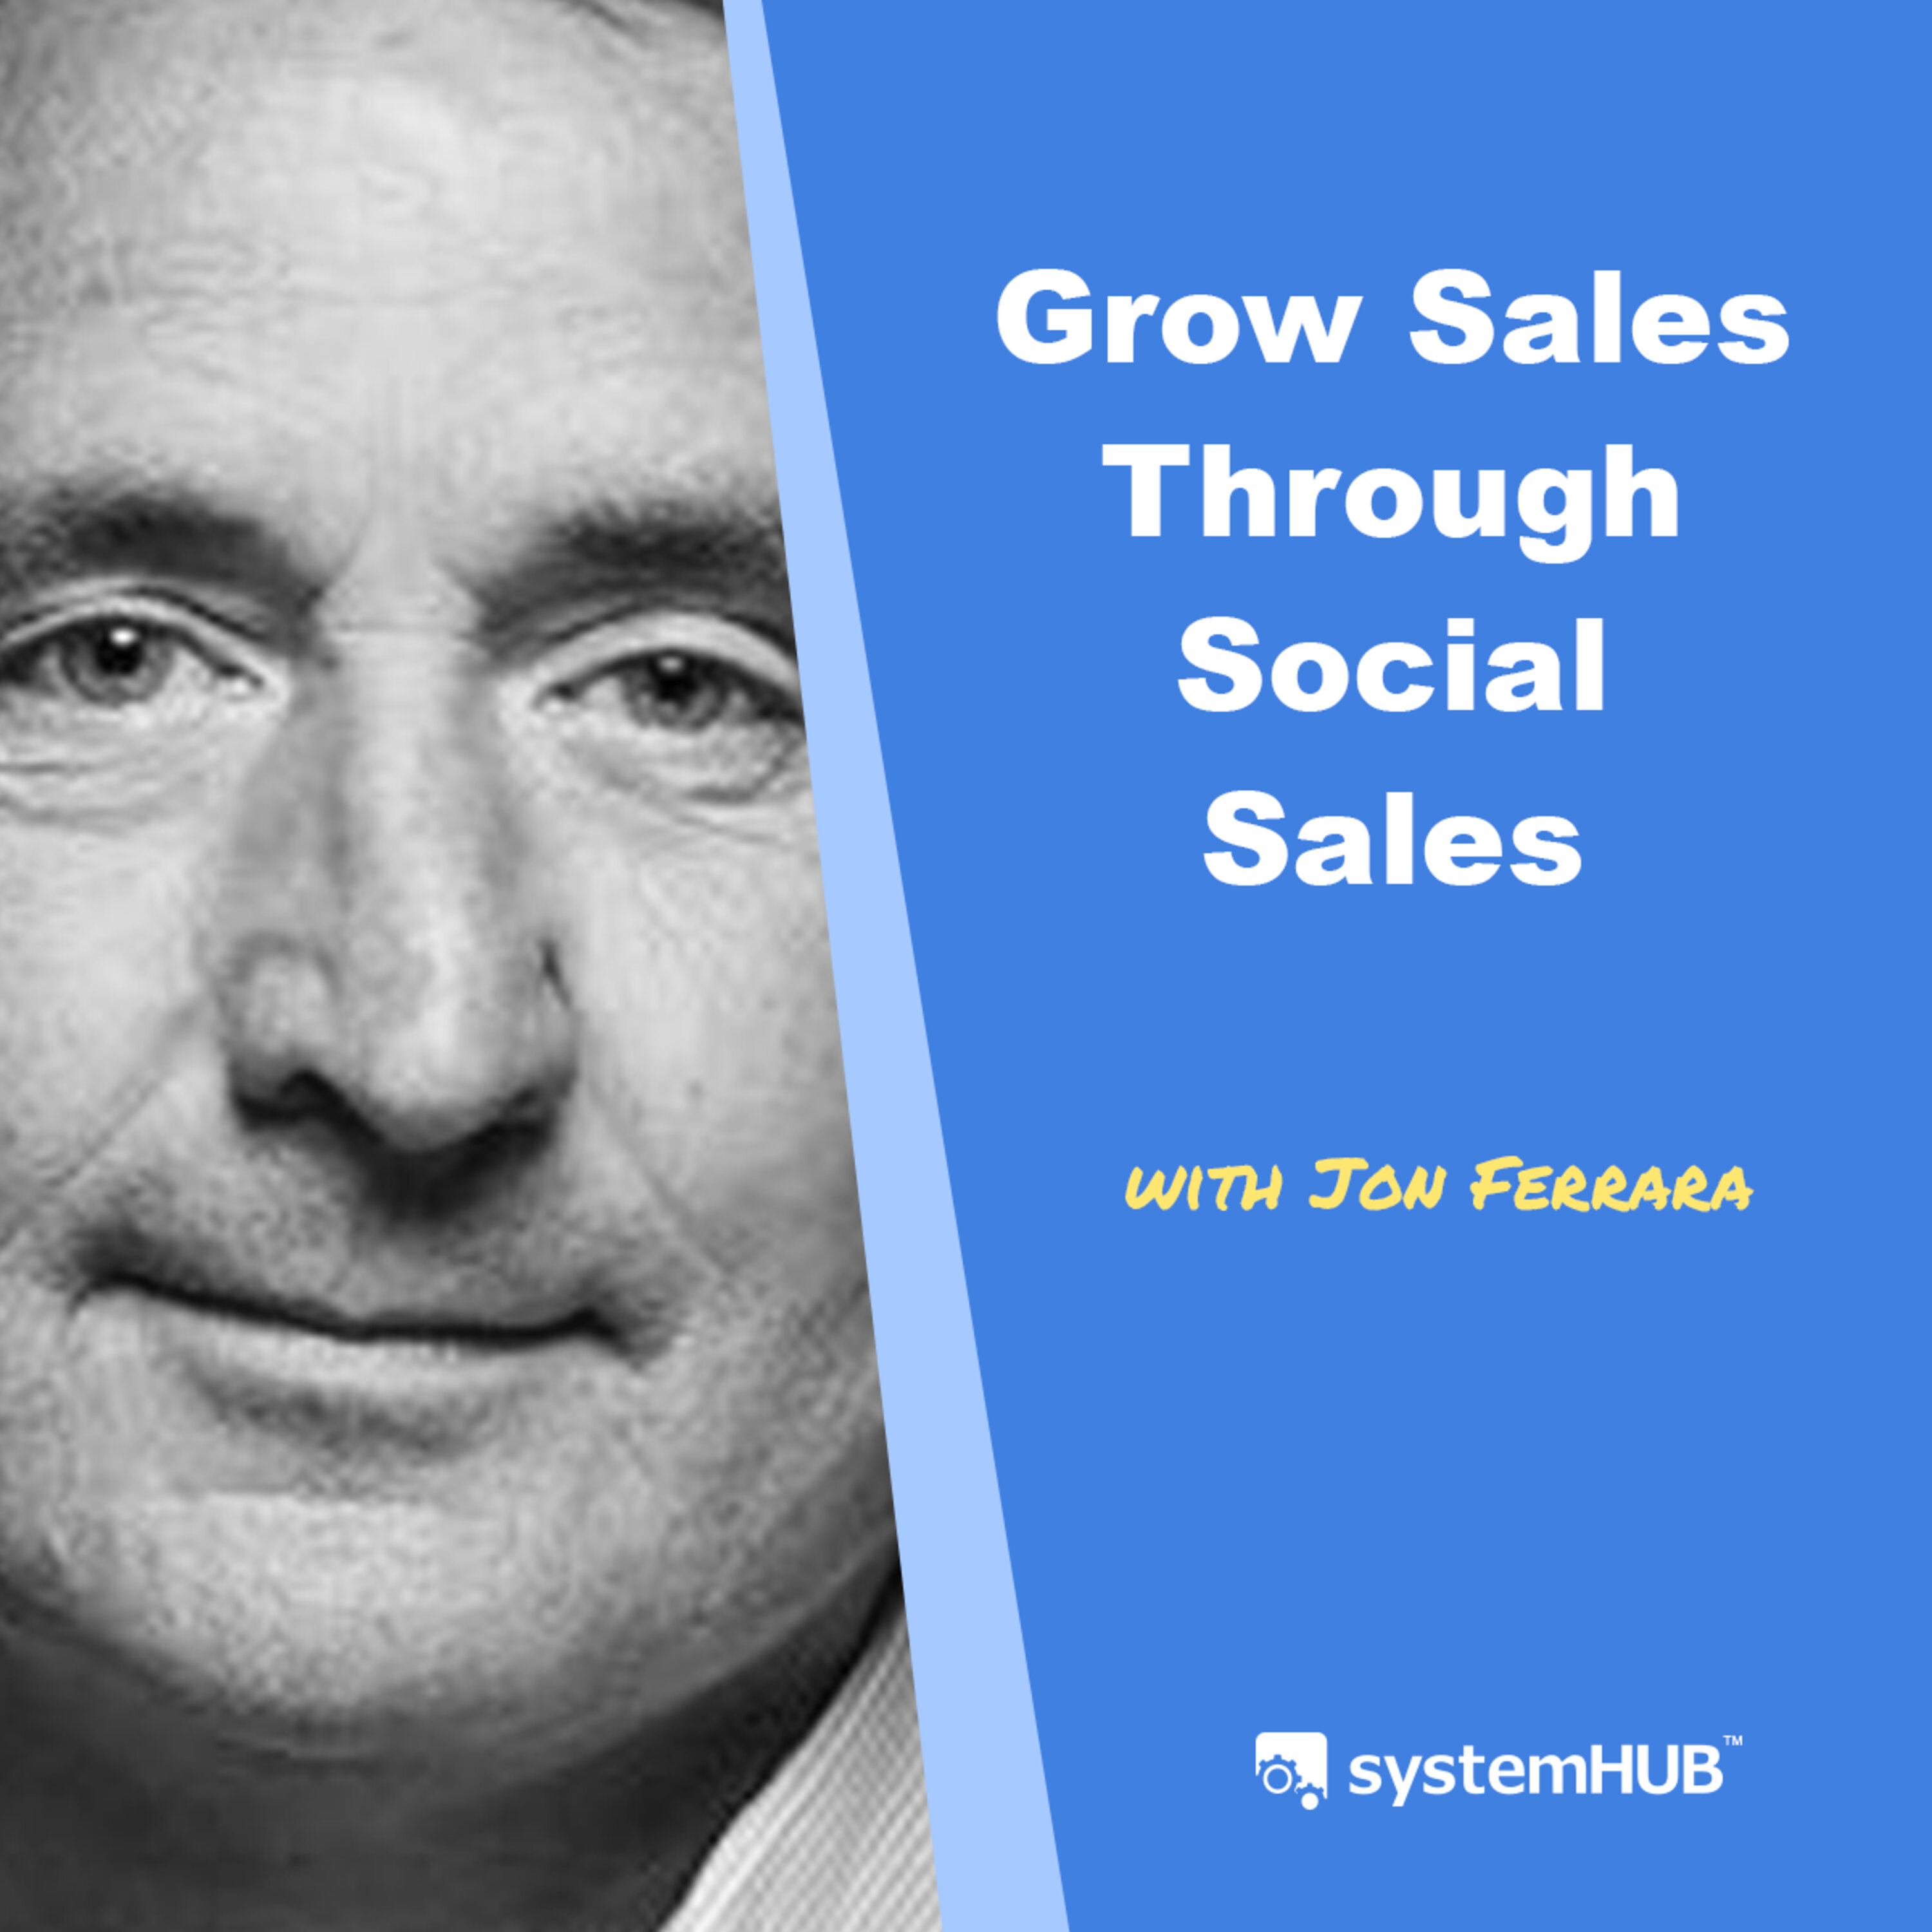 The Step-By-Step System To Grow Sales Through Social Content, Conversations & Influence with Jon Ferrara